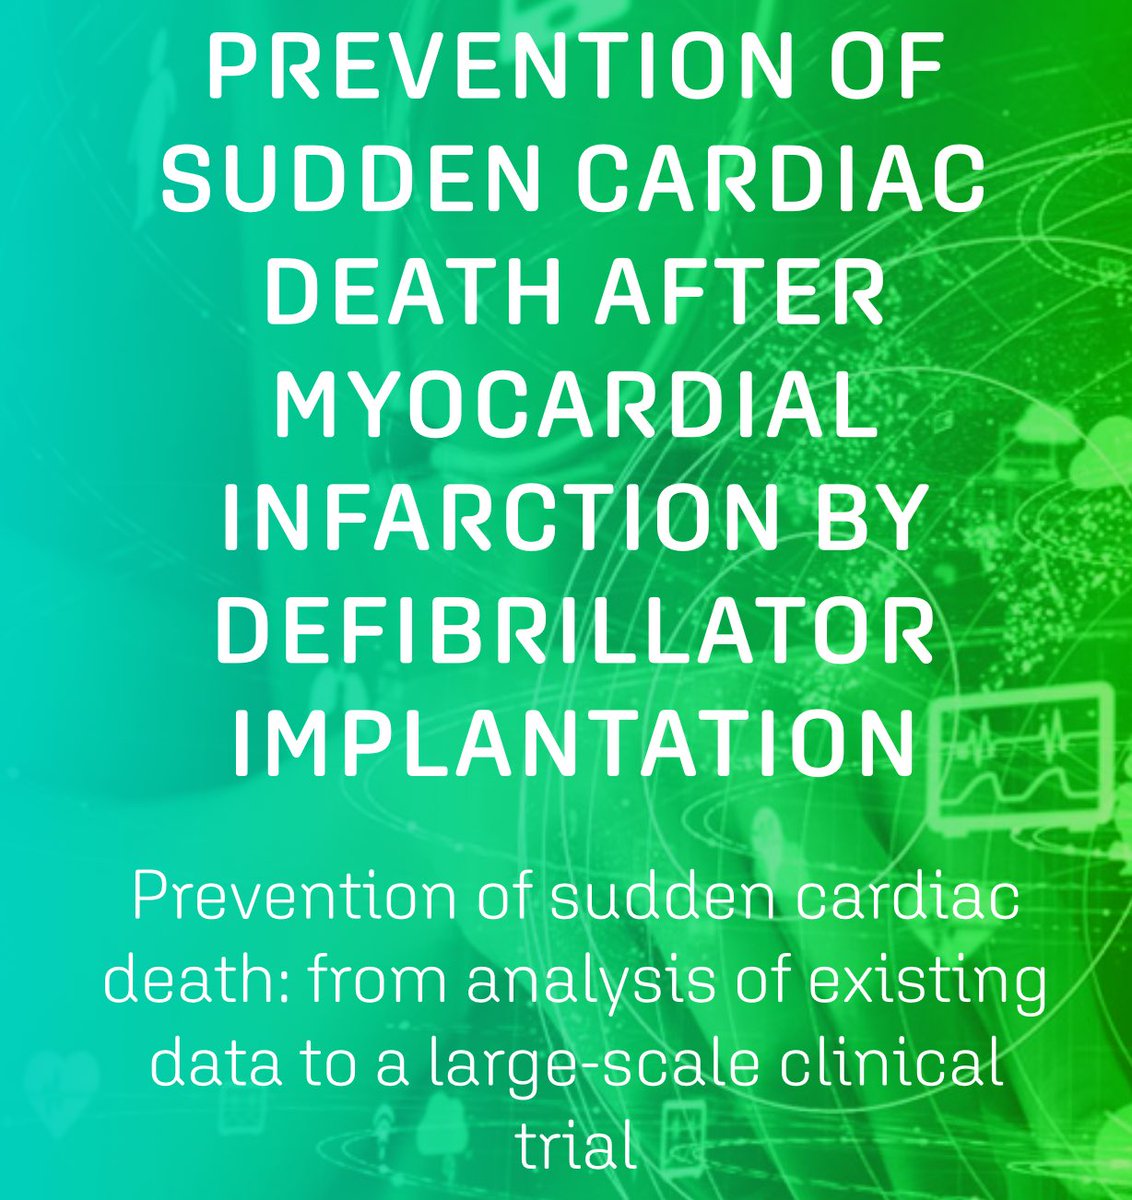 If you are interesting in being a European research site for the @PROFID_EU RCT then contact us: info@profid-project.eu The study is testing primary prevention ICD vs no ICD in post #heartattack patients with #heartfailure & LVEF ≤35% receiving OMT. classic.clinicaltrials.gov/ct2/show/NCT05…